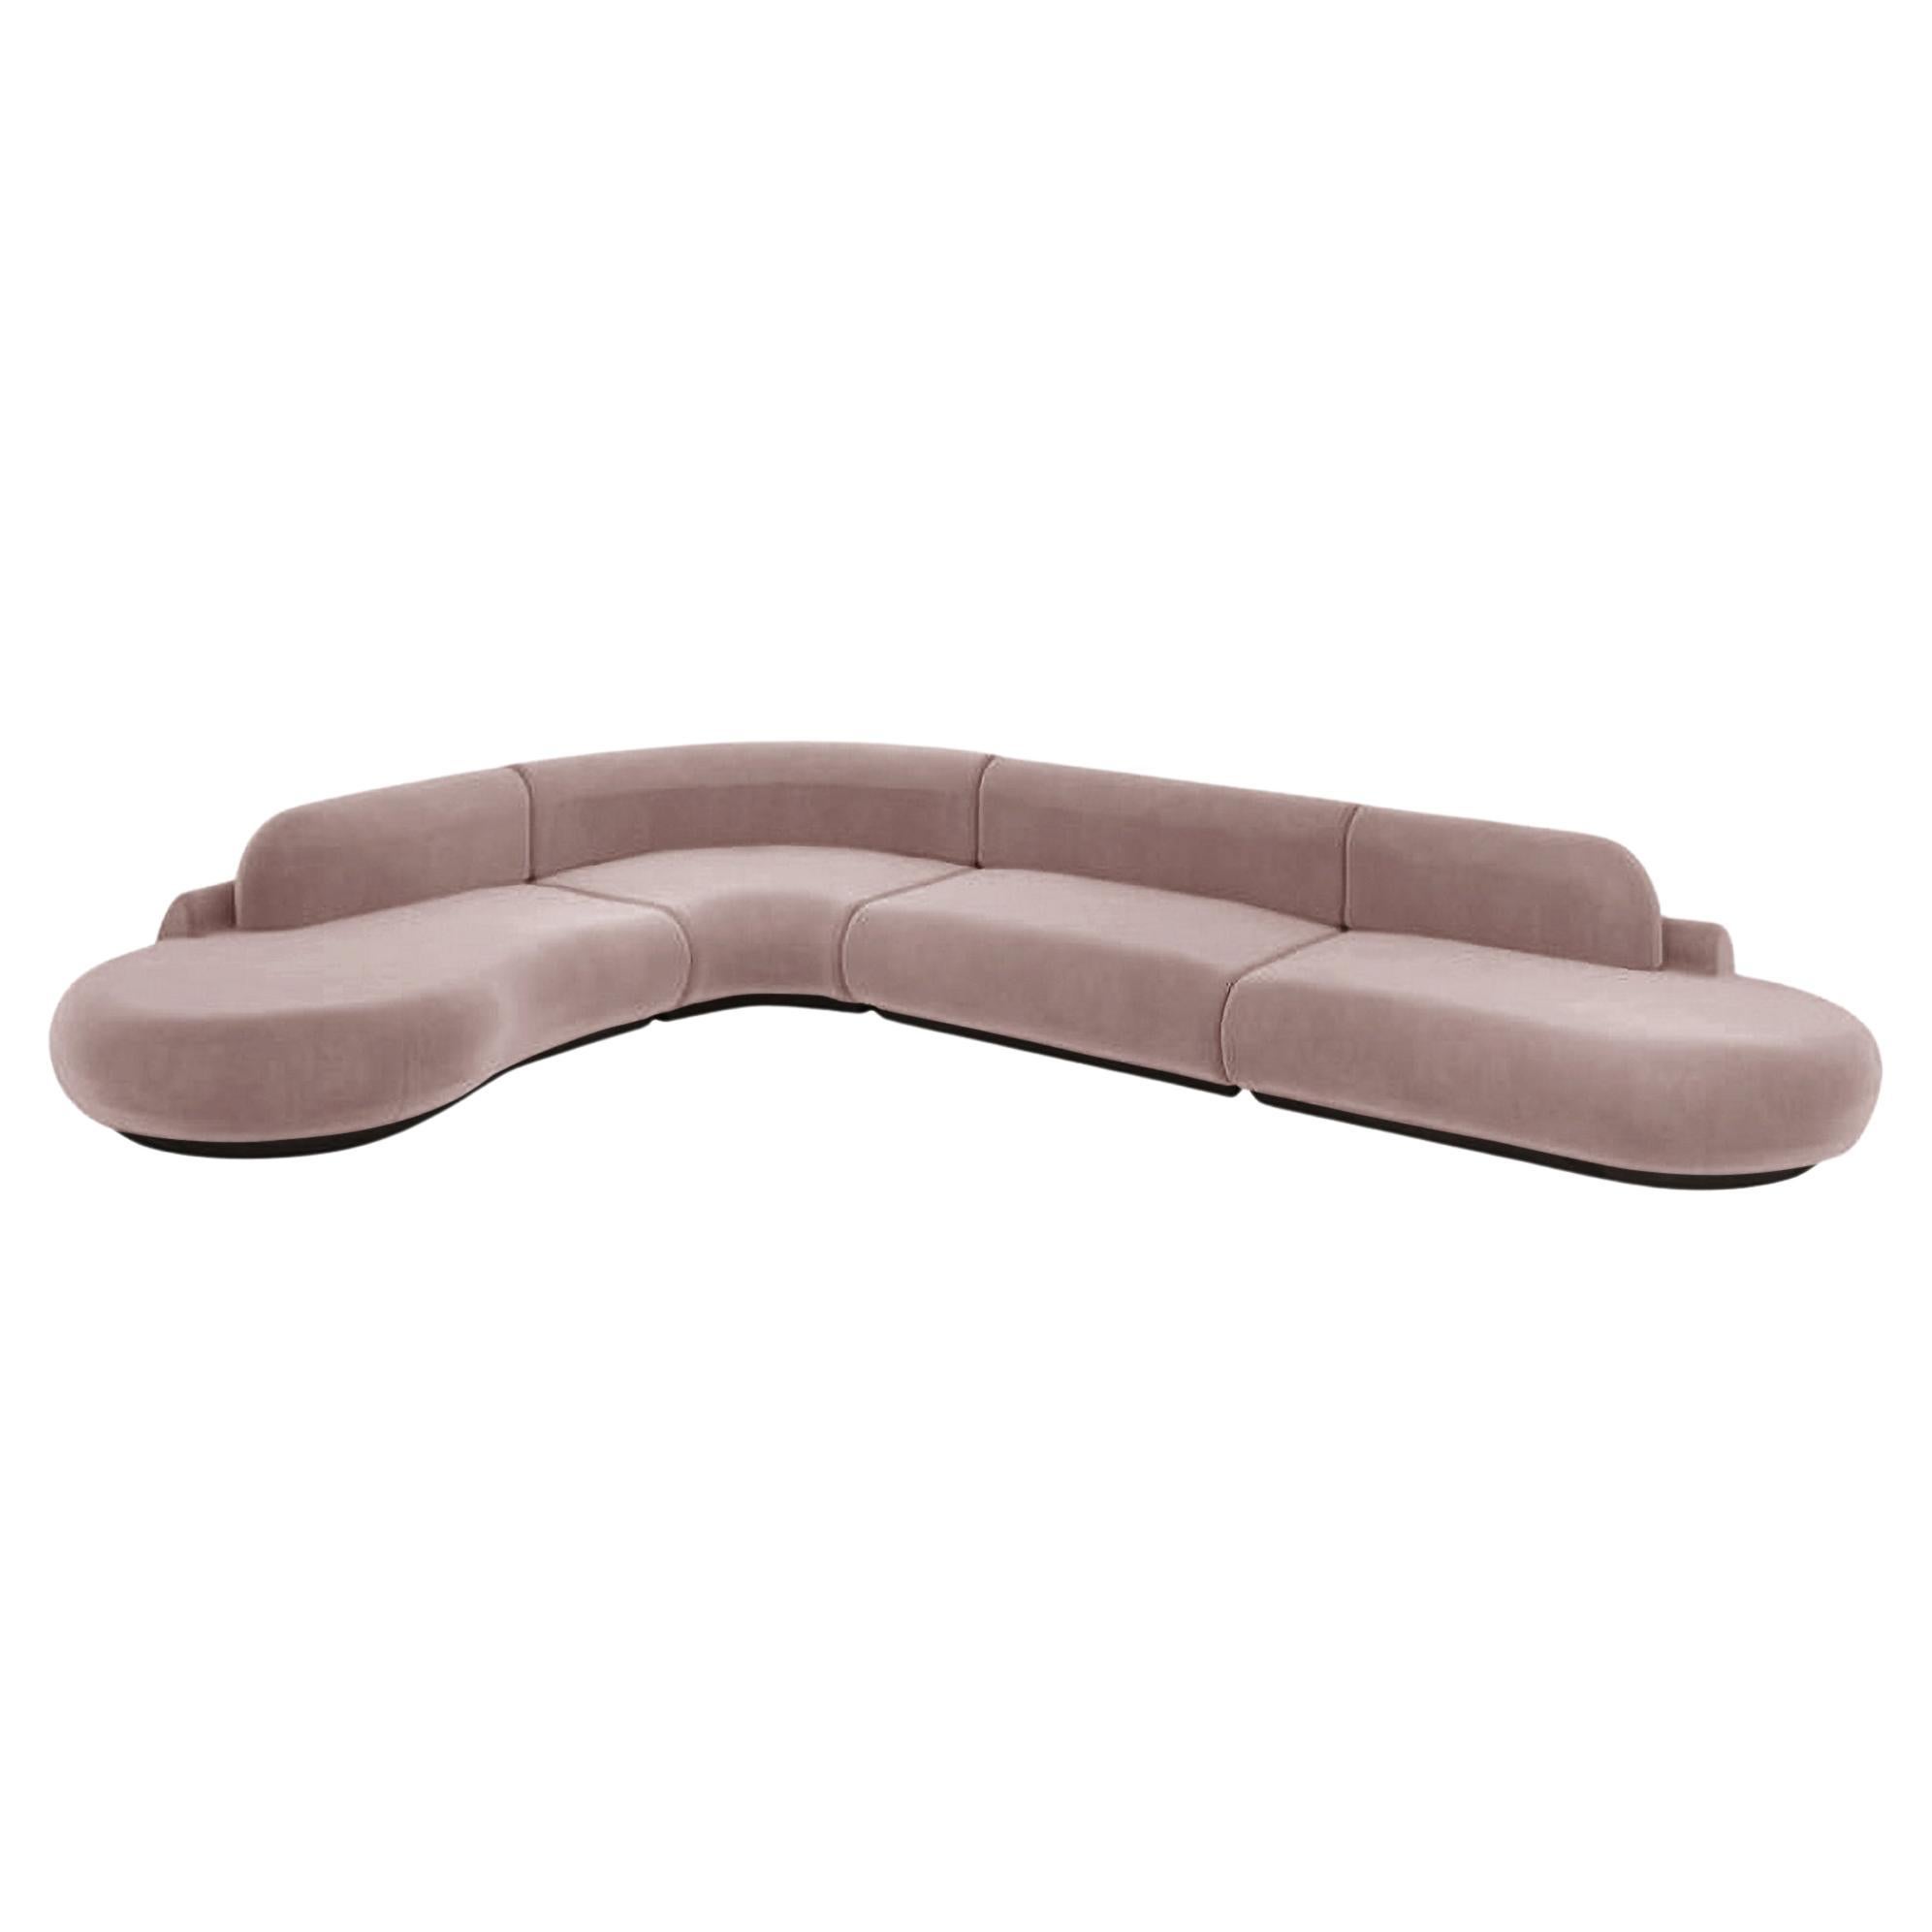 Naked Curved Sectional Sofa, 4 Piece with Beech Ash-056-5 and Barcelona Lotus For Sale